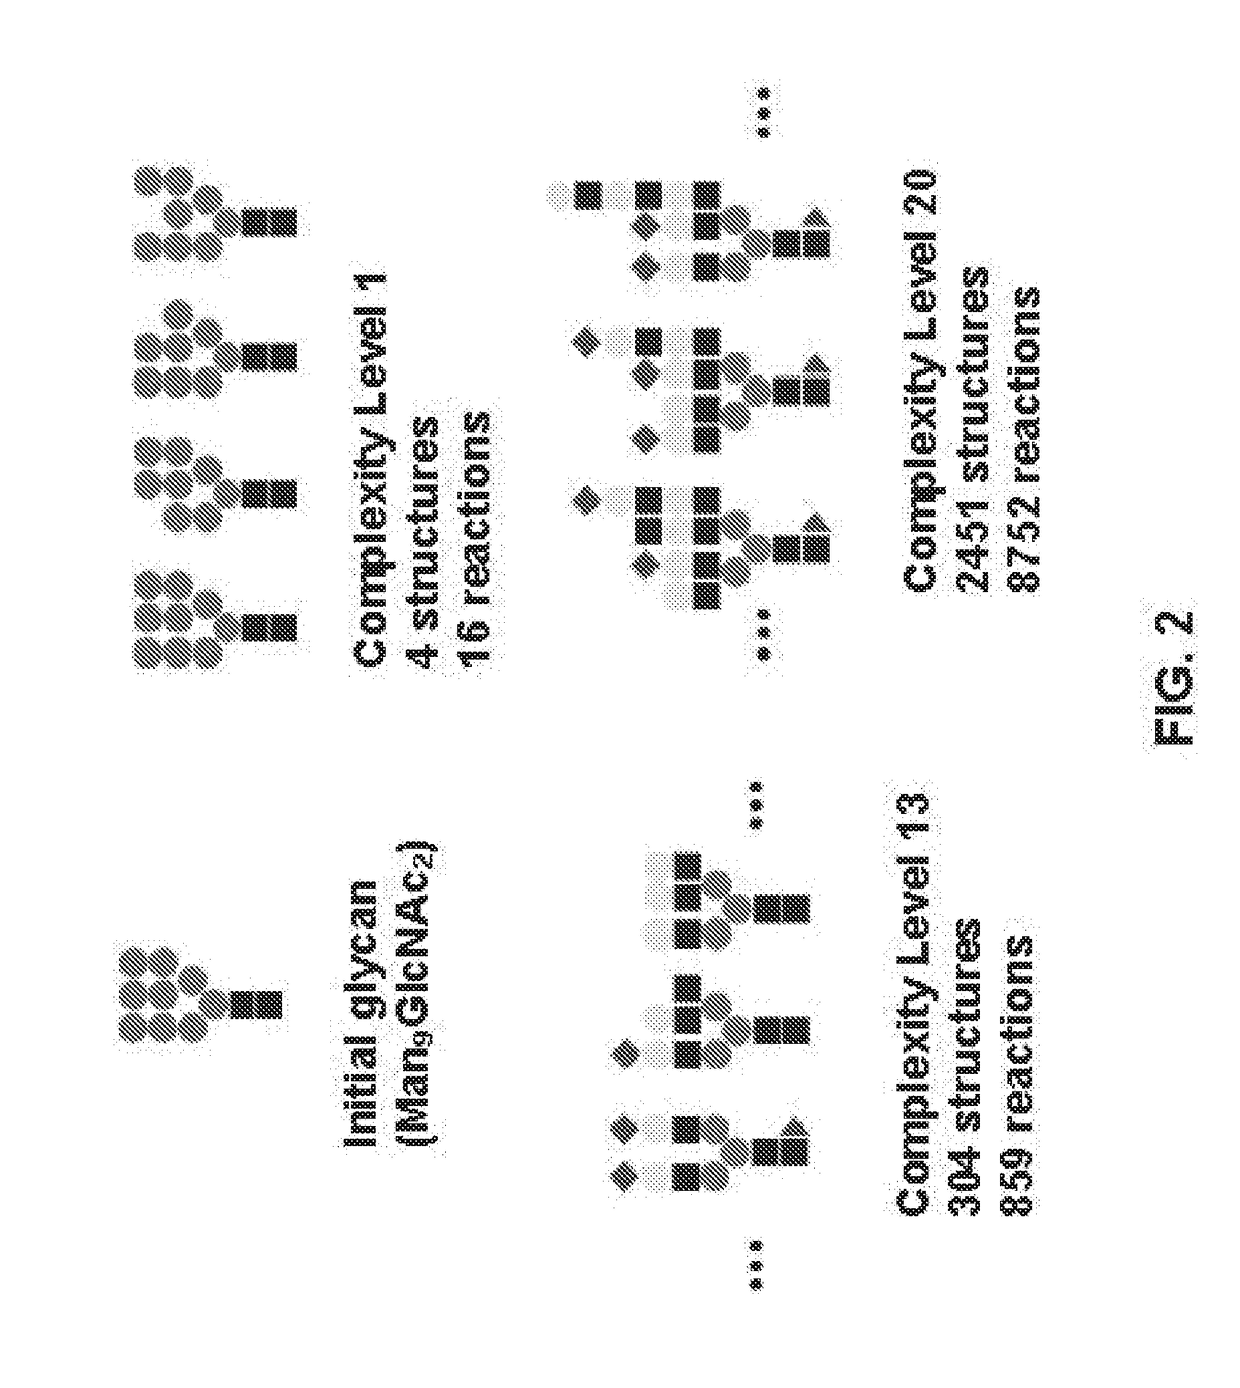 Systems and Methods for Predicting Glycosylation on Proteins